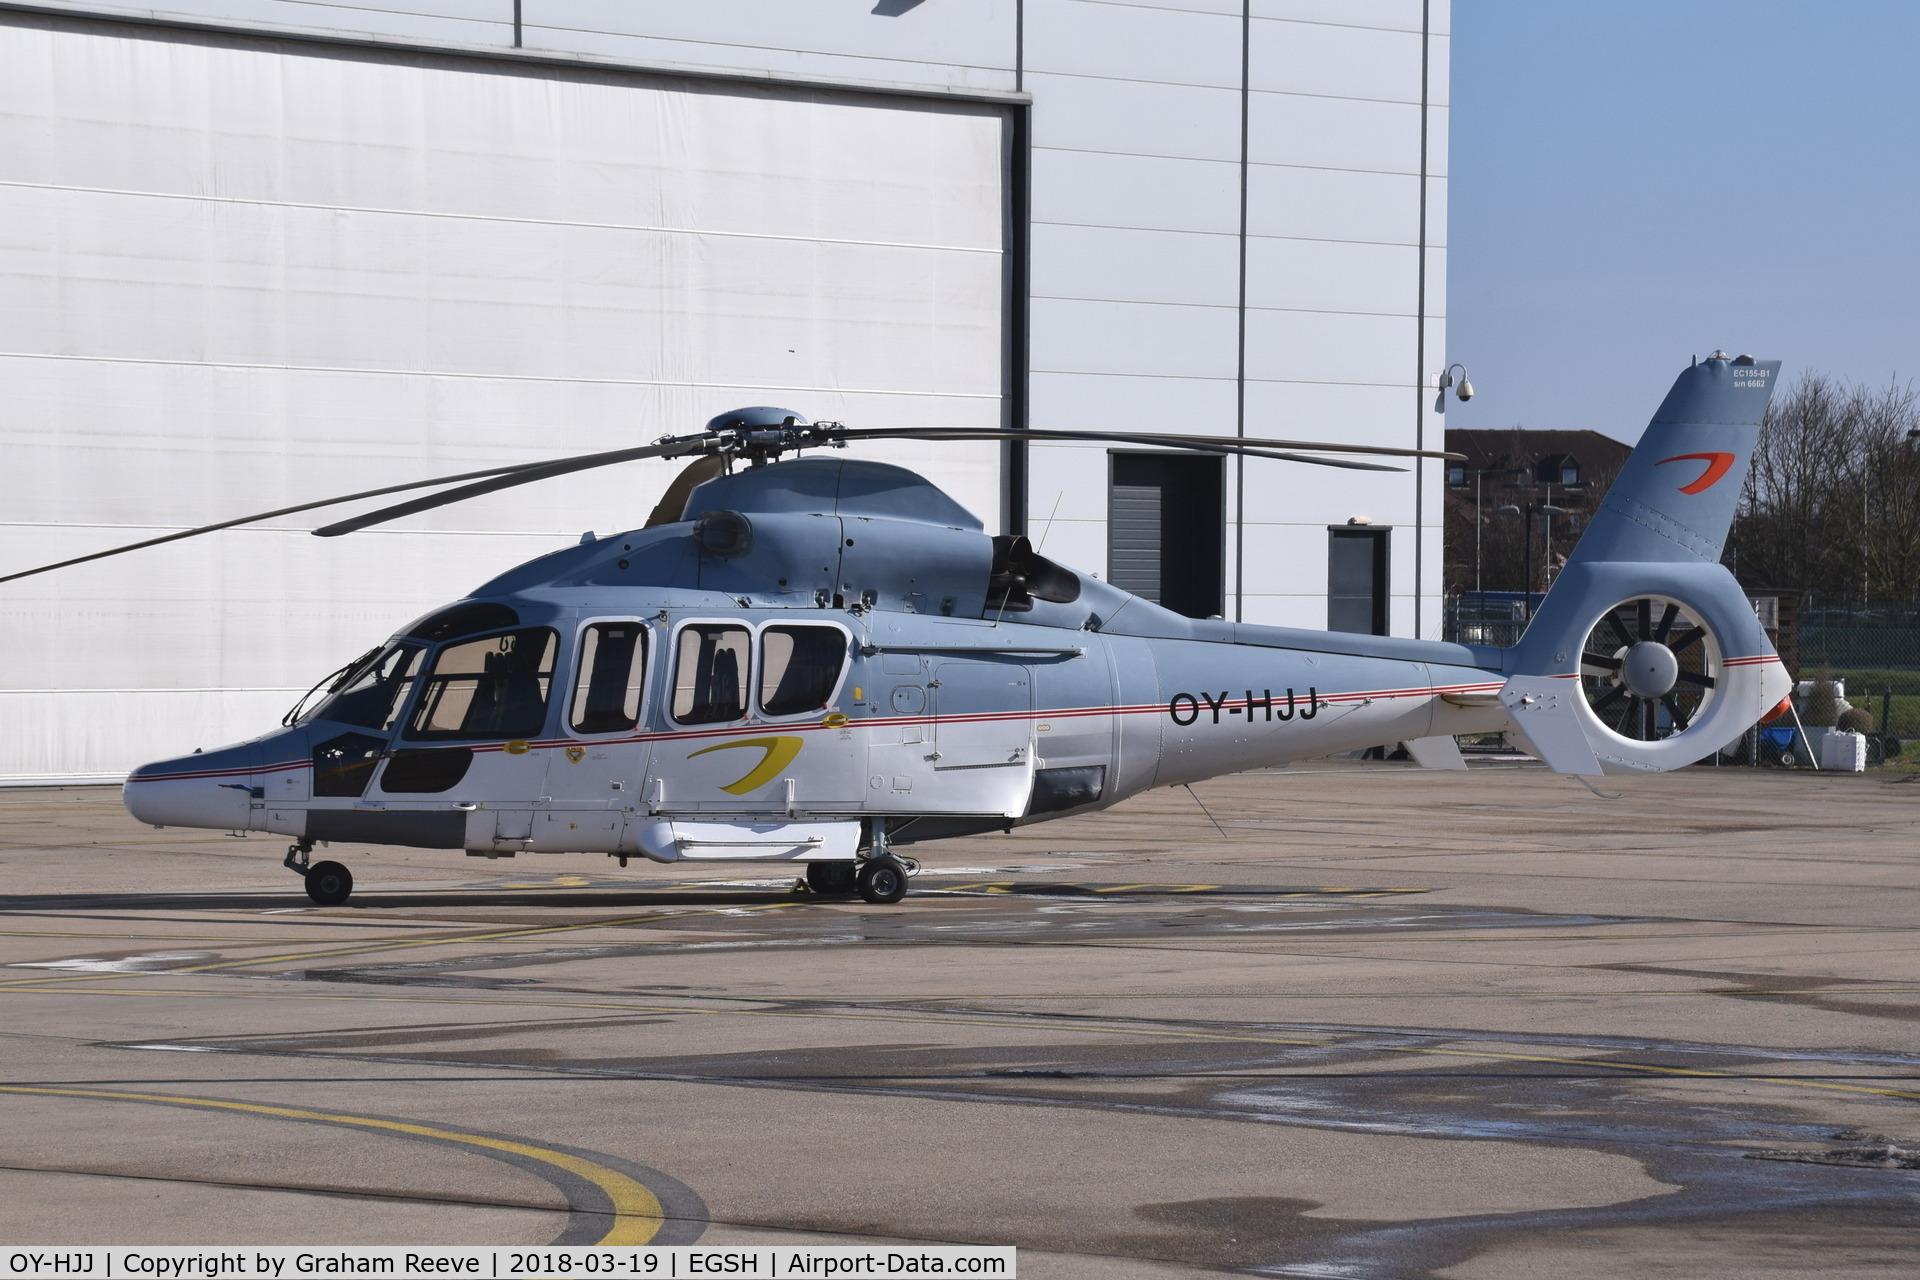 OY-HJJ, 2003 Eurocopter EC-155B-1 C/N 6662, Parked at Norwich with a change of 